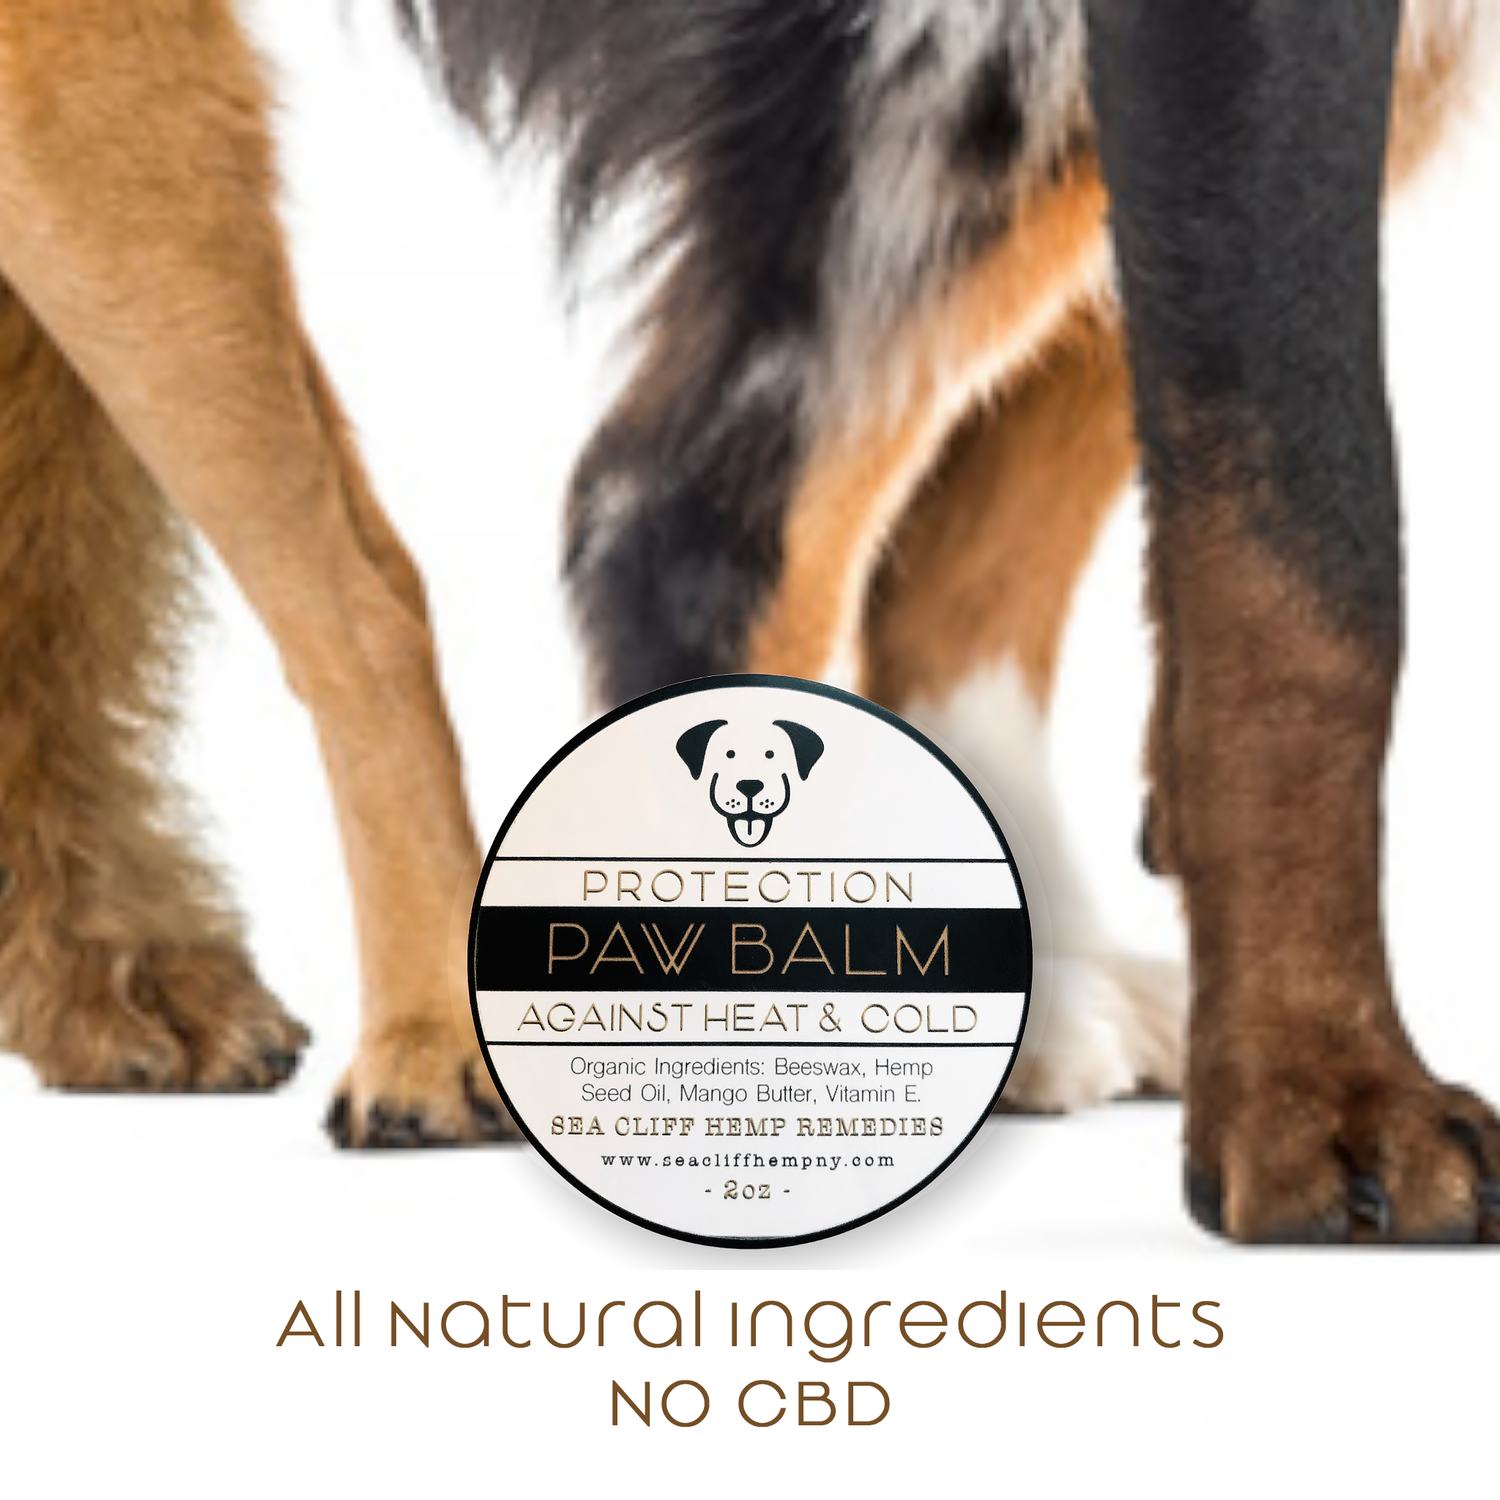 Organic balm to protect dog paws from excssive heat and cold